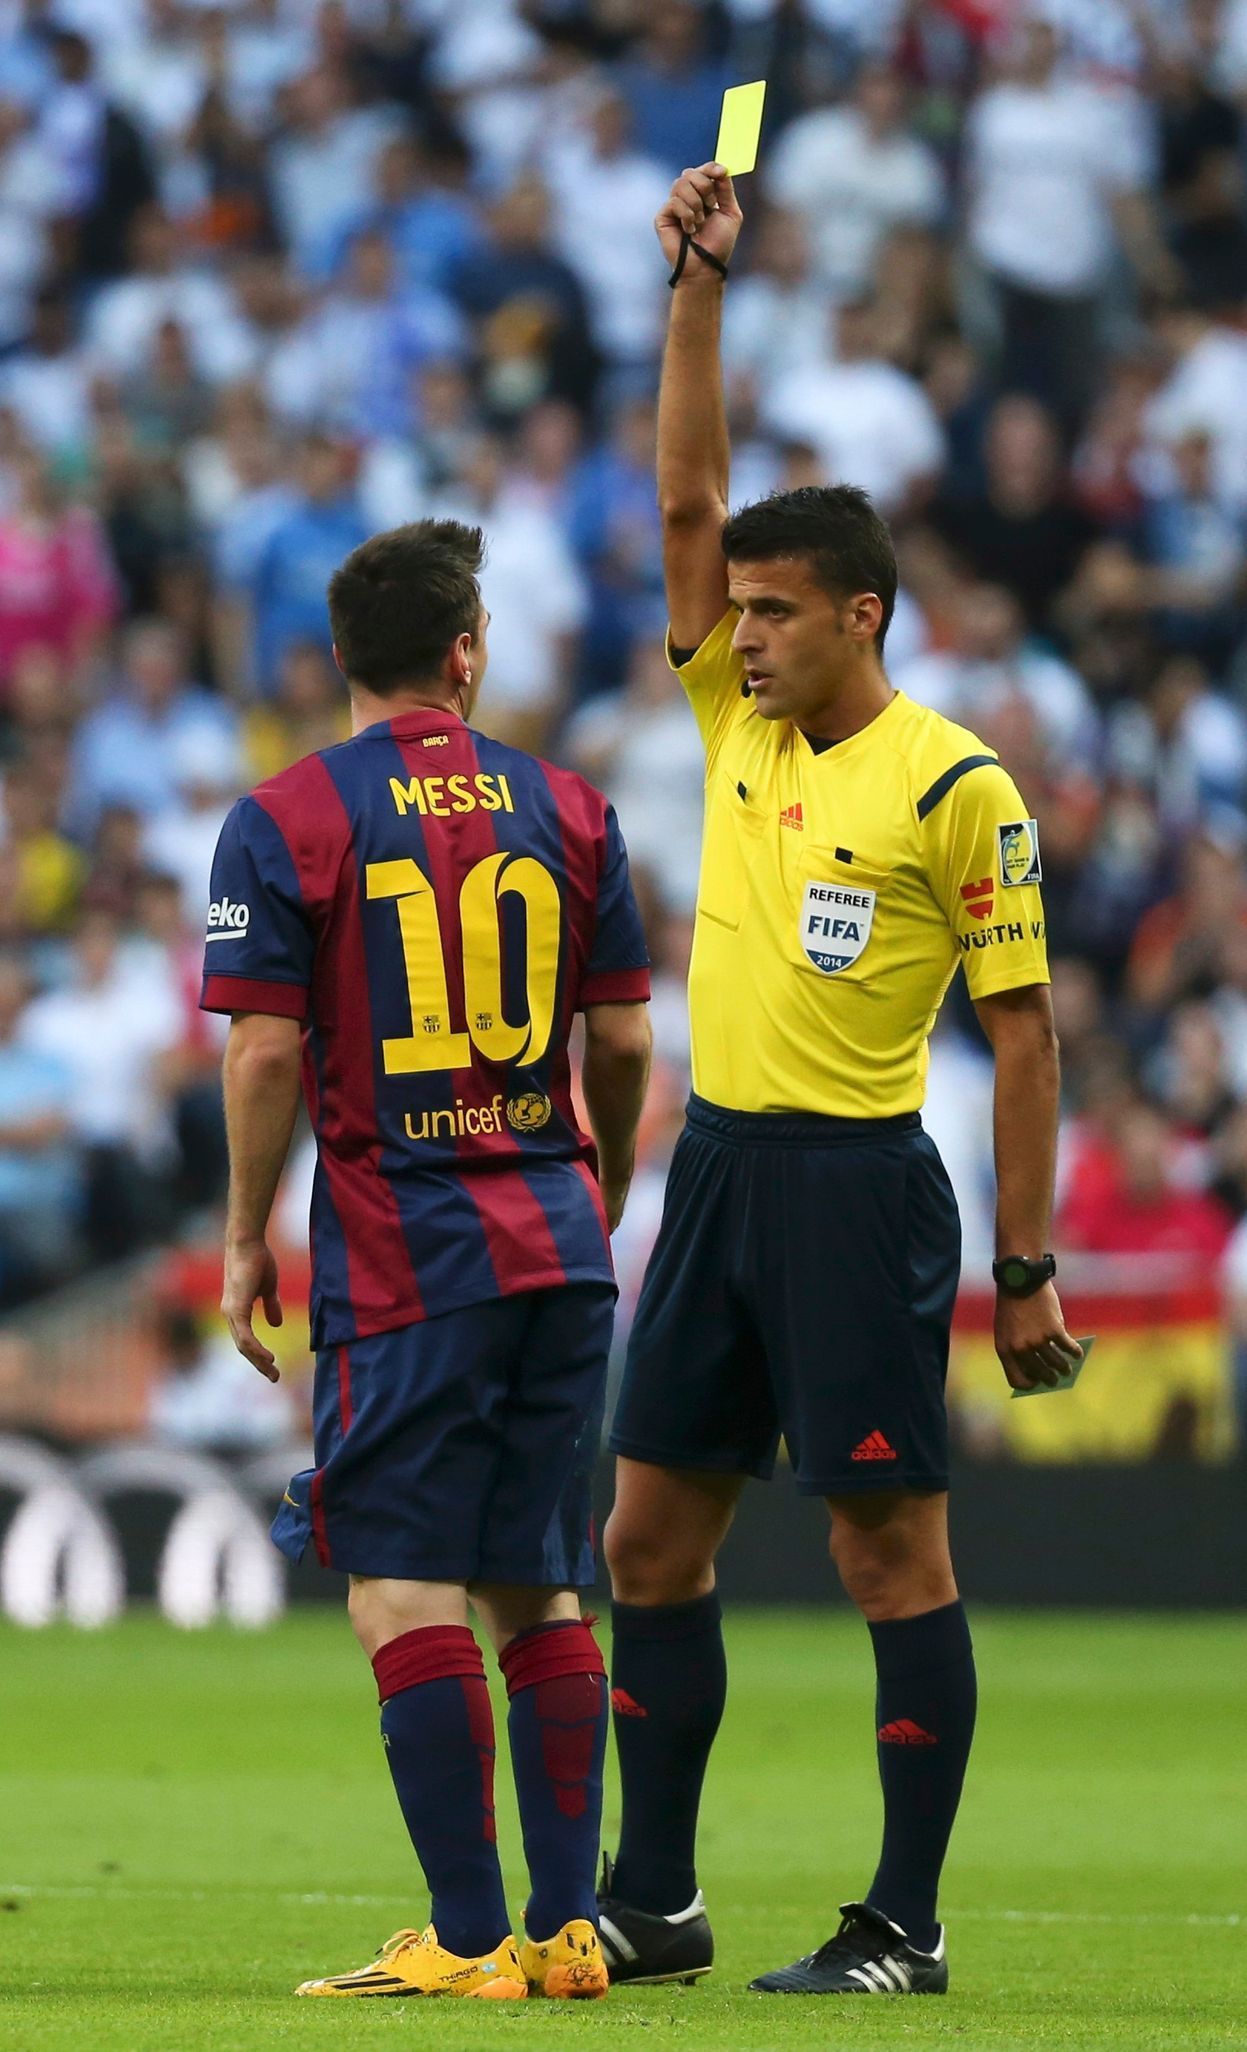 Barcelona's Messi is shown a yellow card by referee Manzano during the Spanish first division &quot;Clasico&quot; soccer match against Real Madrid at the Santiago Bernabeu stadium in Madrid